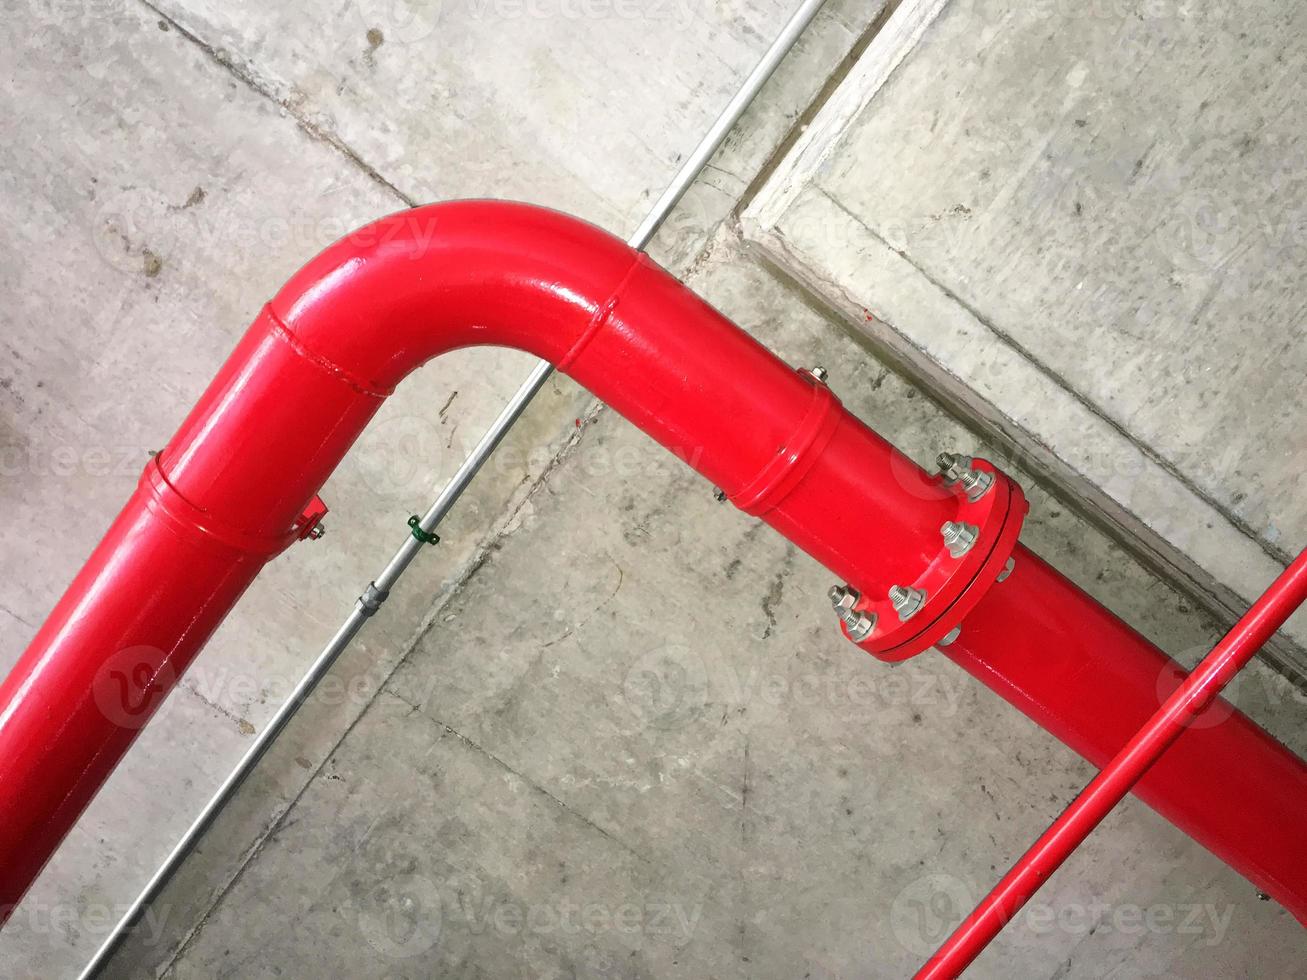 Water valve for fire fighting systems, water sprinkler and fire alarm system, water sprinkler control system, red generator pump for water sprinkler piping and fire alarm control system. photo